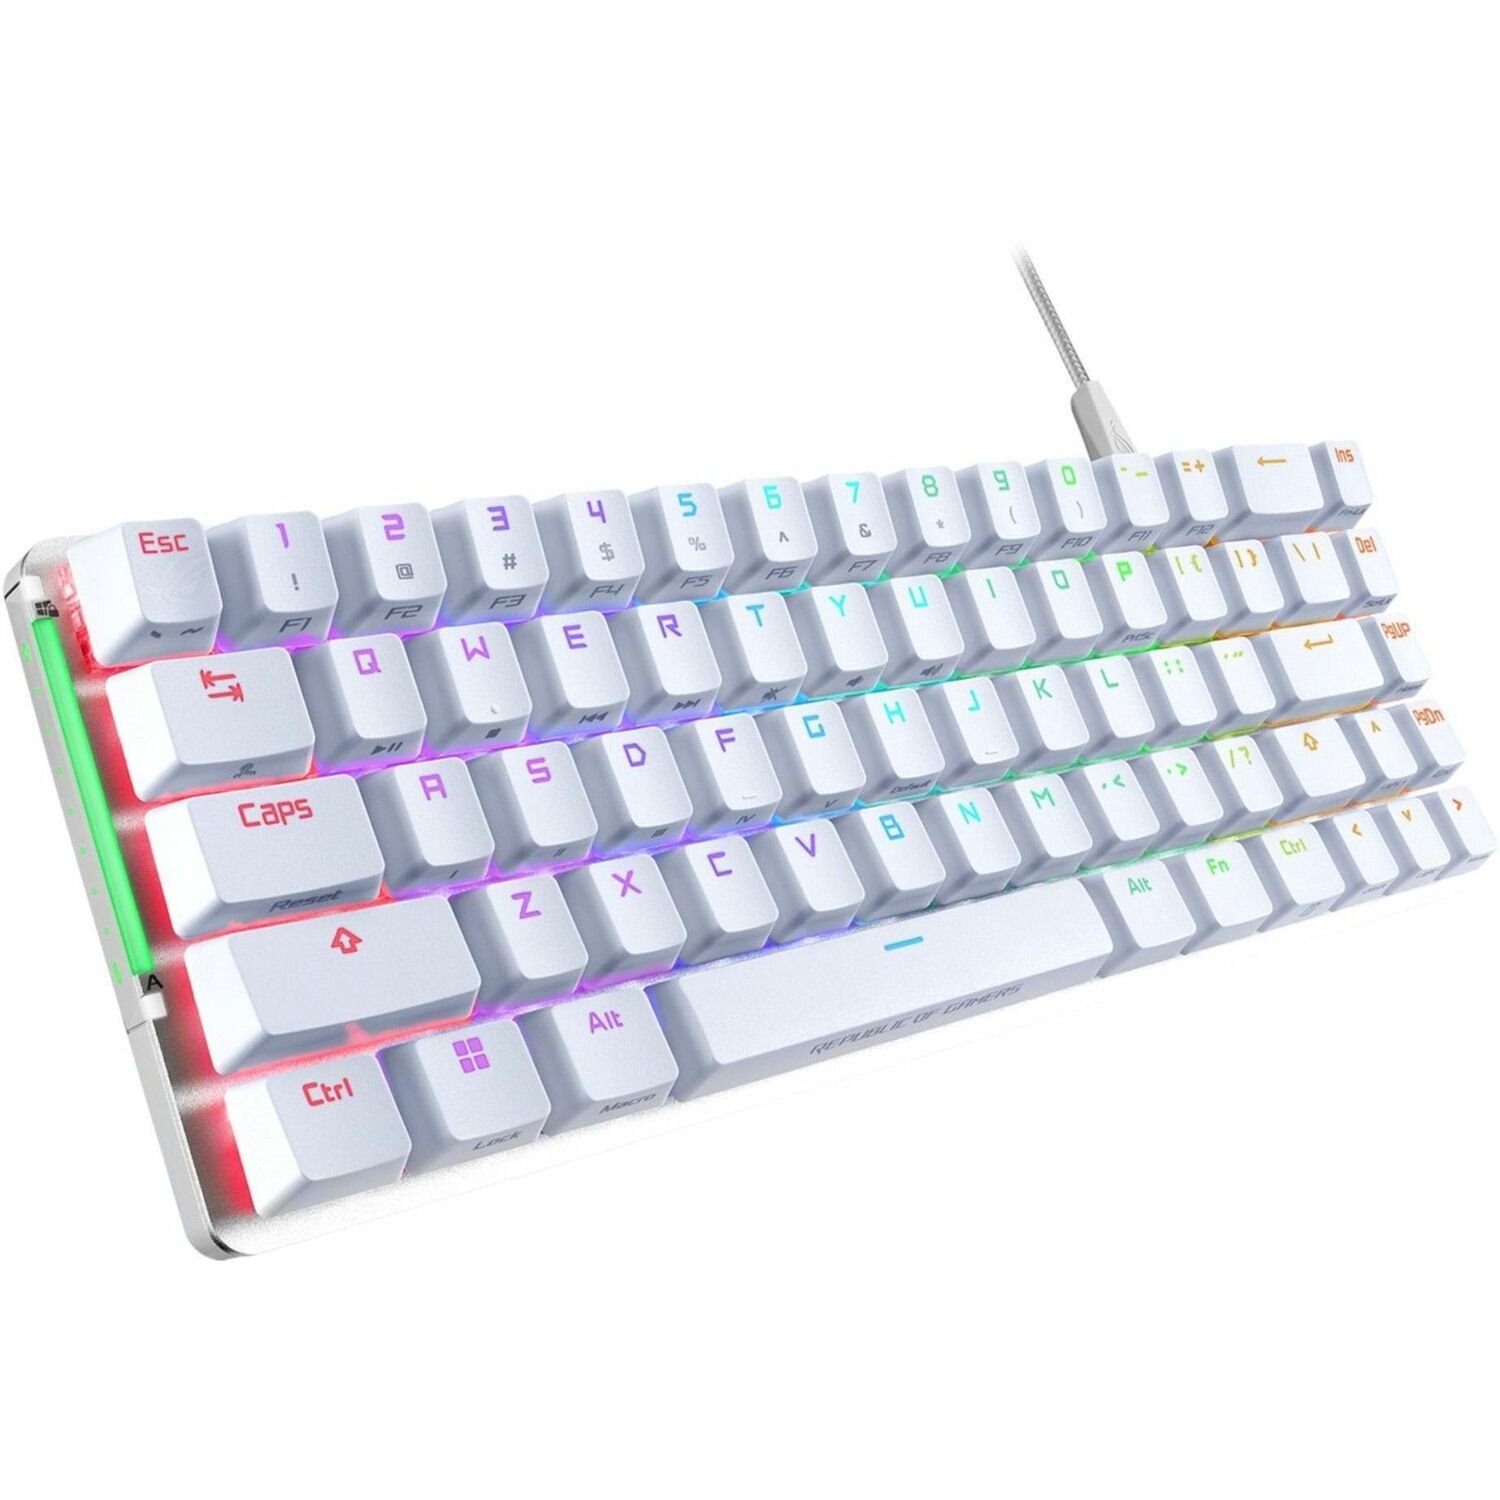 Asus ROG Falchion Ace Gaming Keyboard - Cable Connectivity - USB 2.0 Type A Interface - RGB LED - Thai, English - White